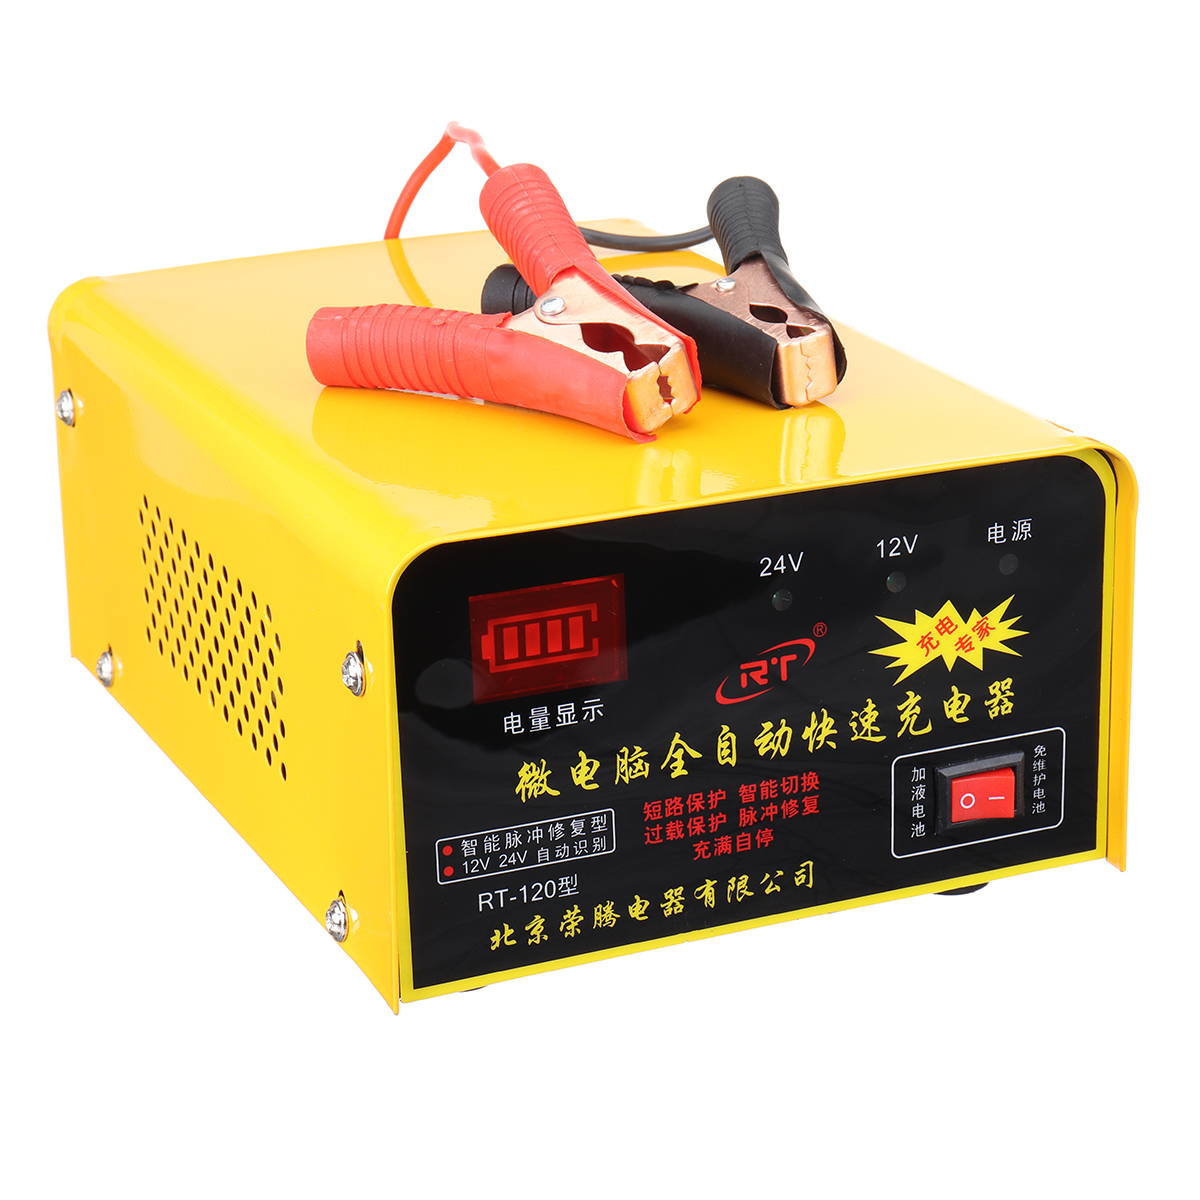 

RT002 12V 24V 200AH Intelligent Pulse Repair LED Display Voltage Automatic Identification Car Battery Charger